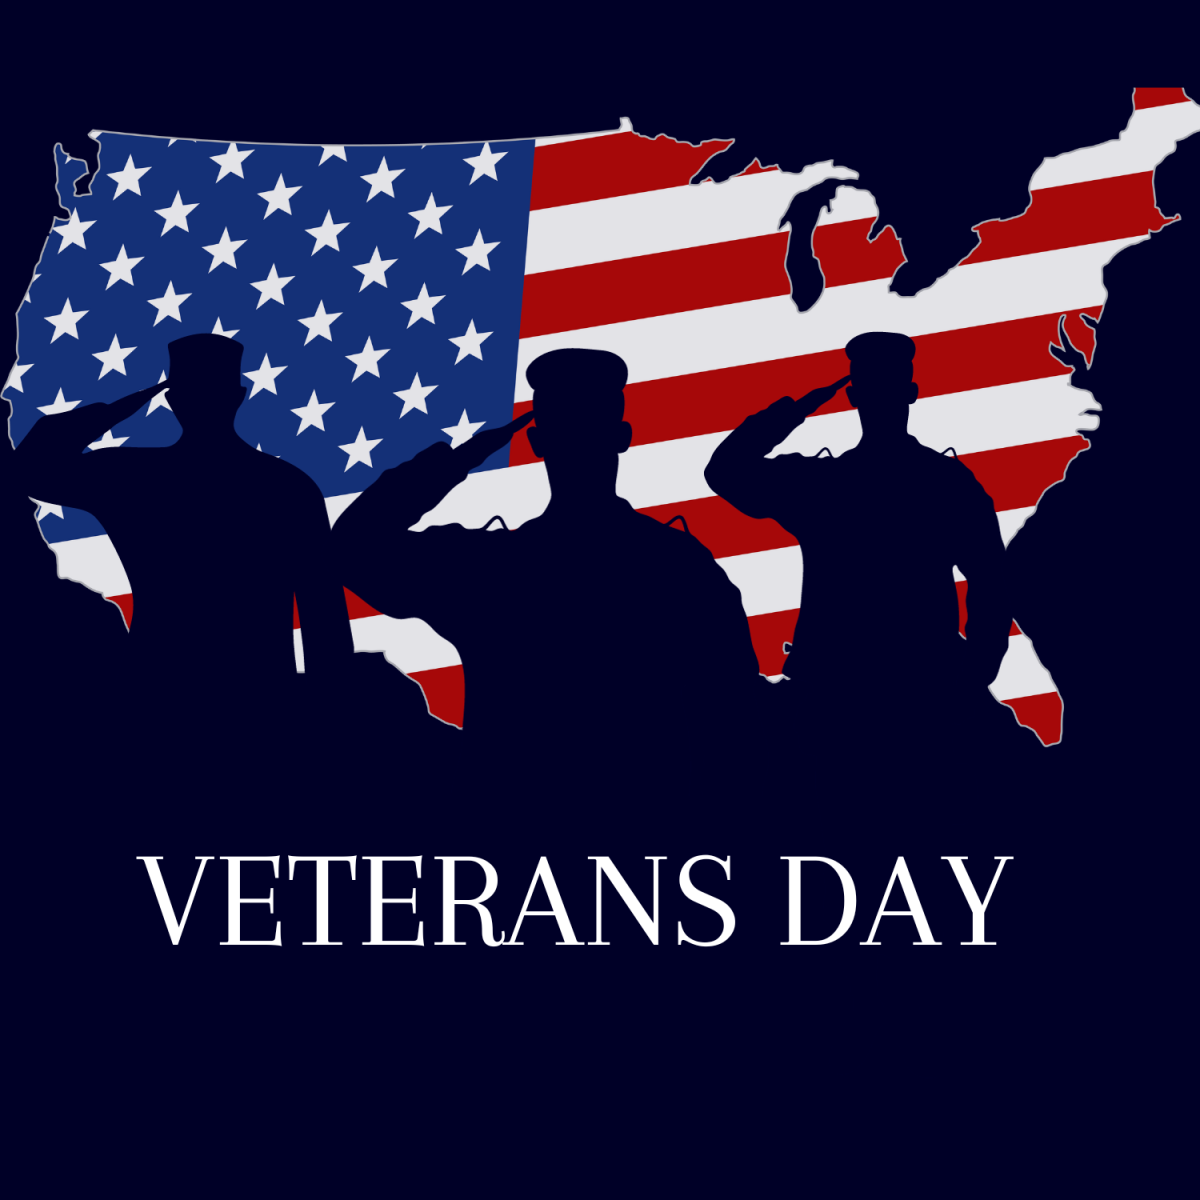 The History of Veterans Day